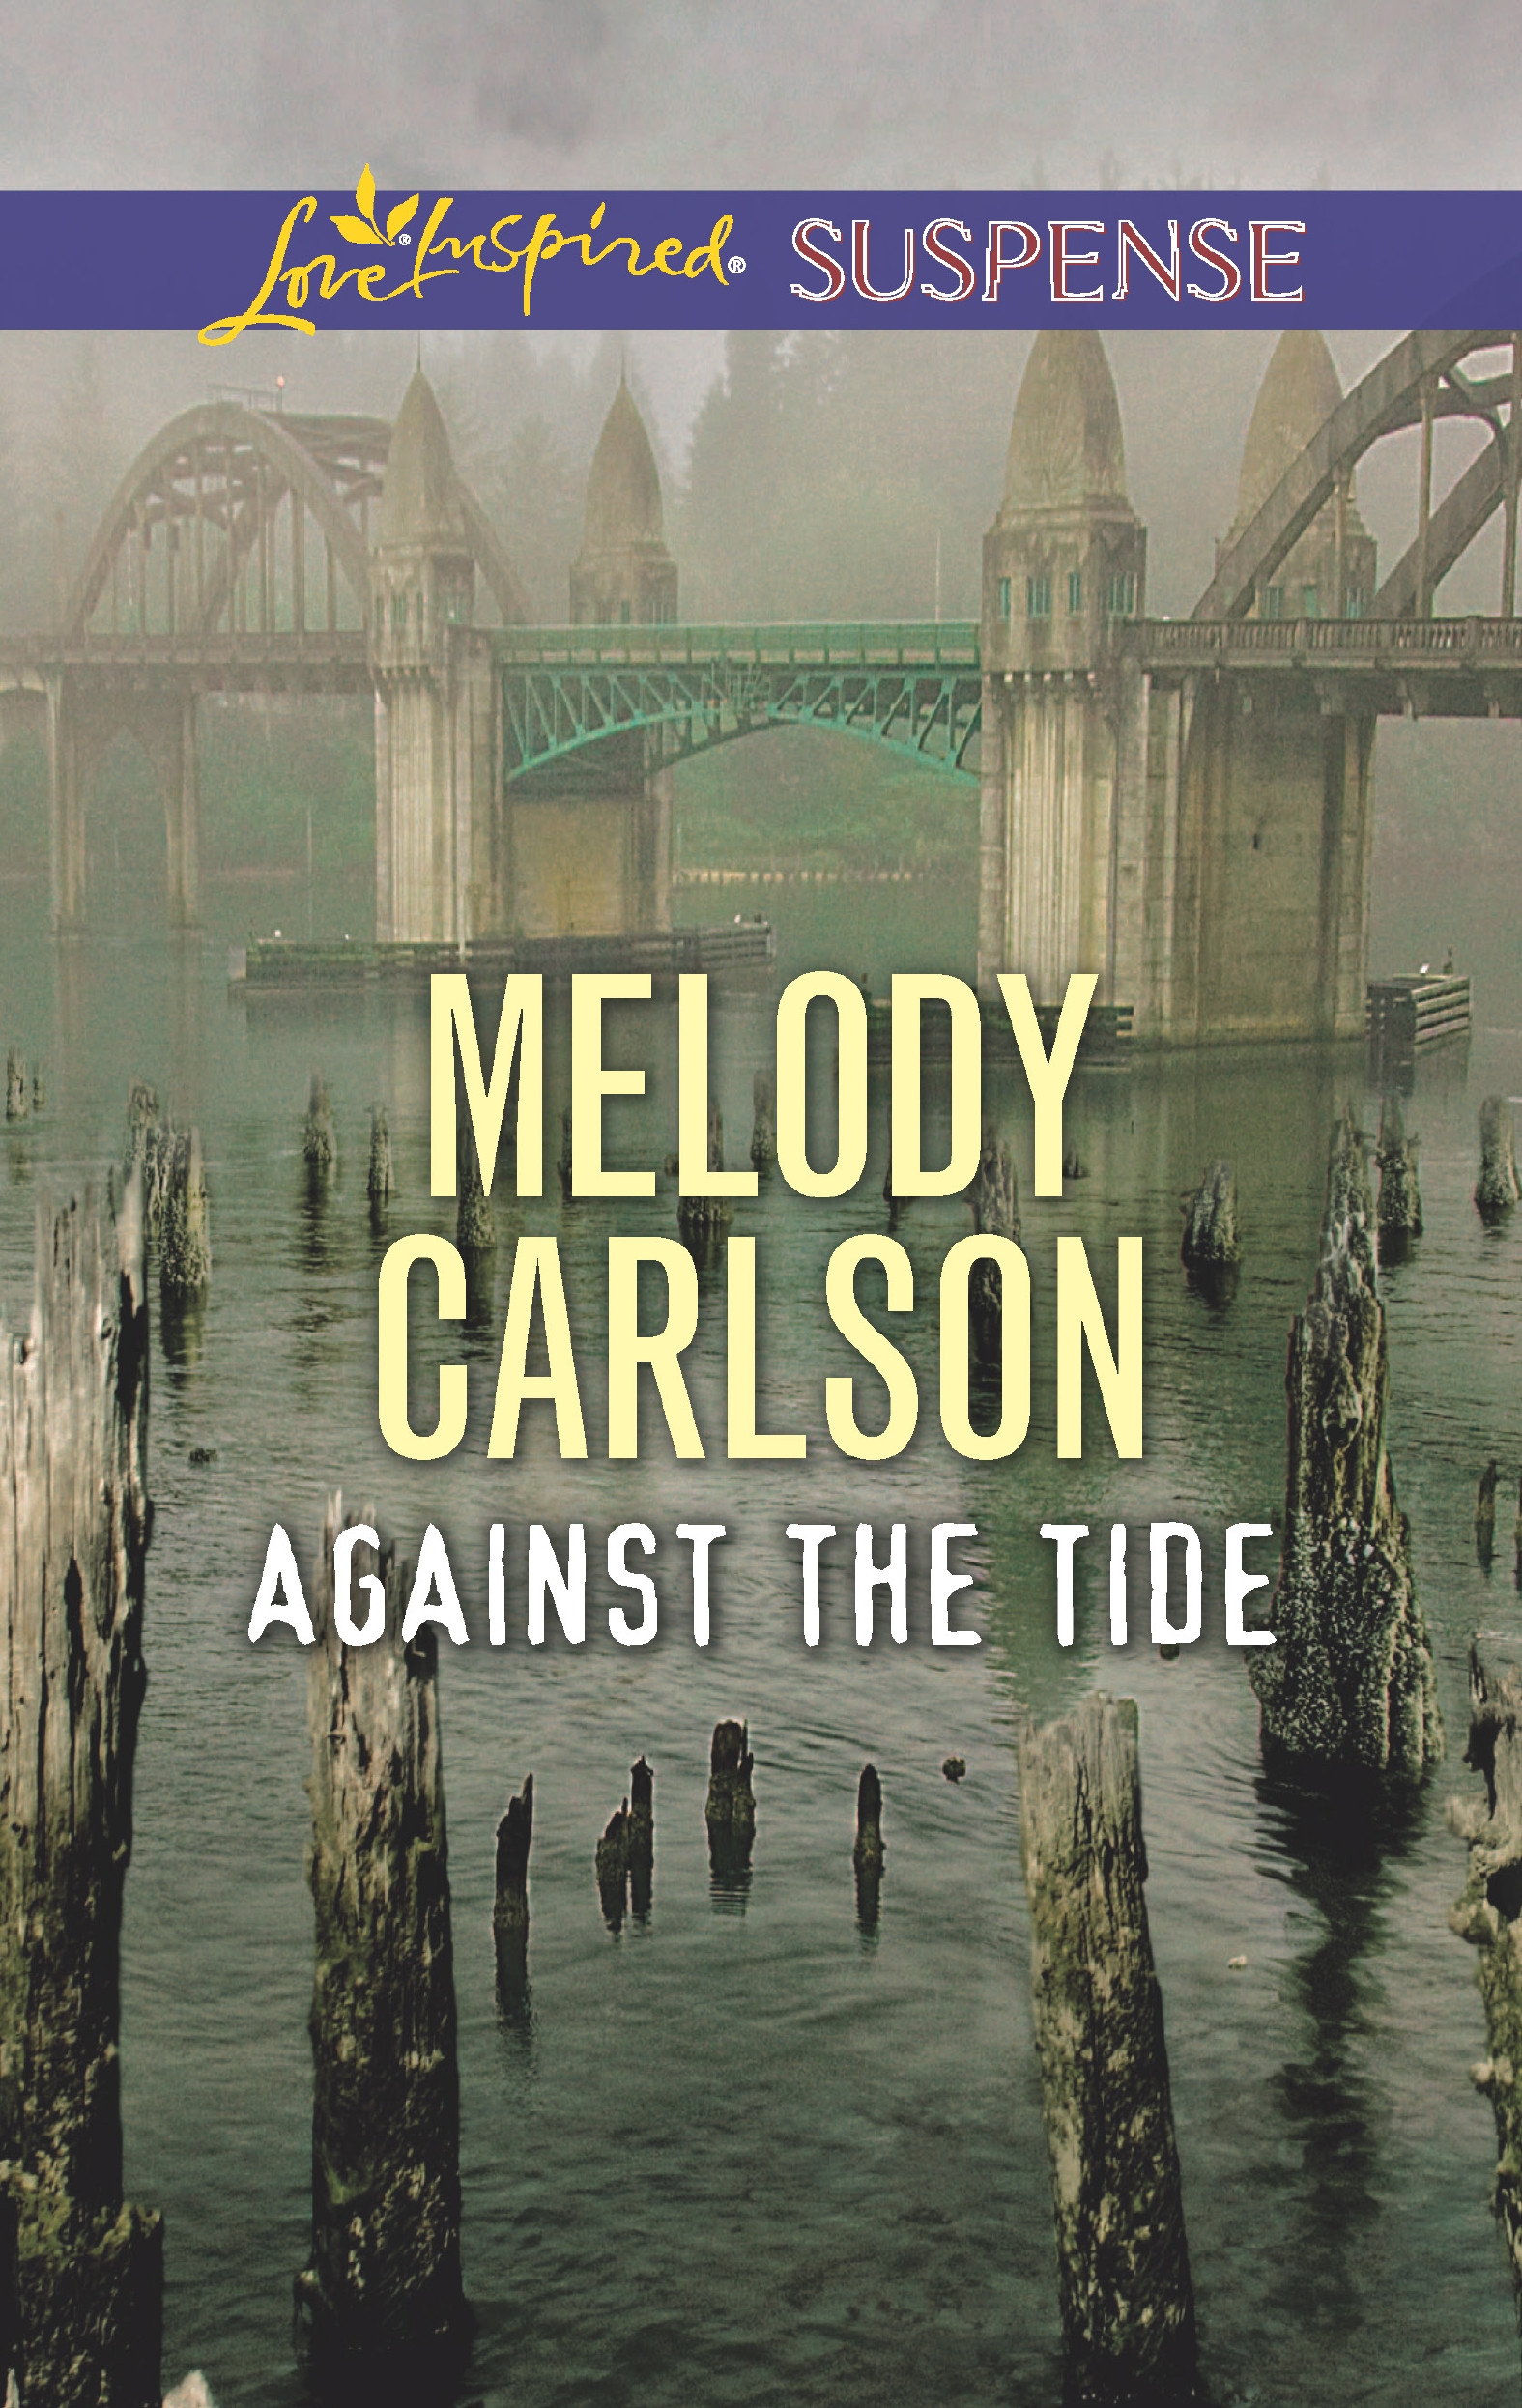 Against the Tide (2016) by Melody Carlson